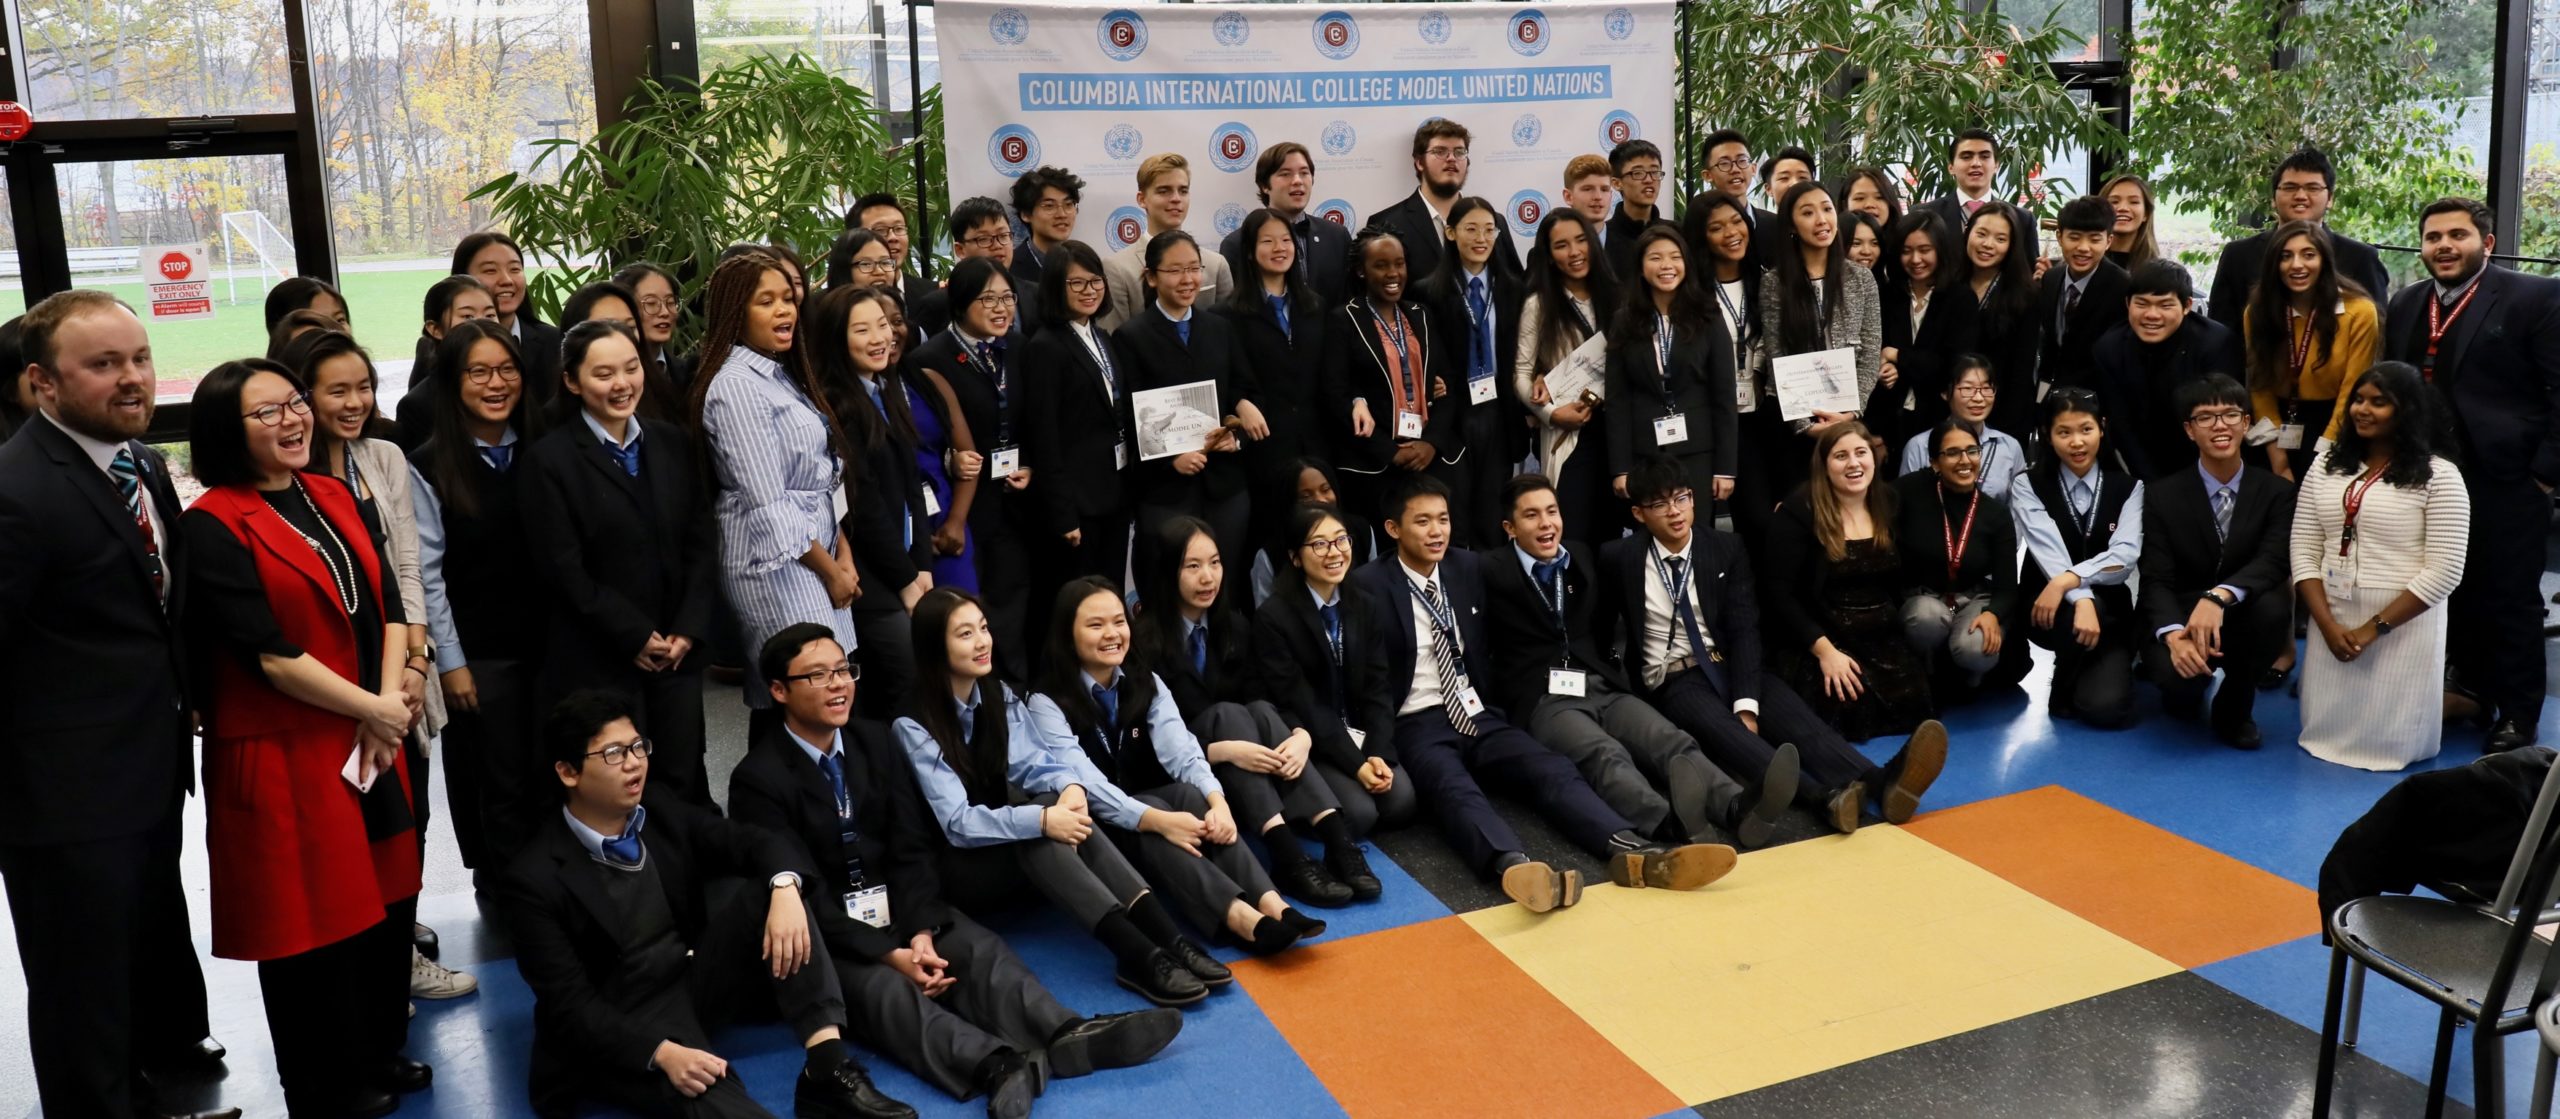 The 2nd Annual CIC Model United Nations Conference